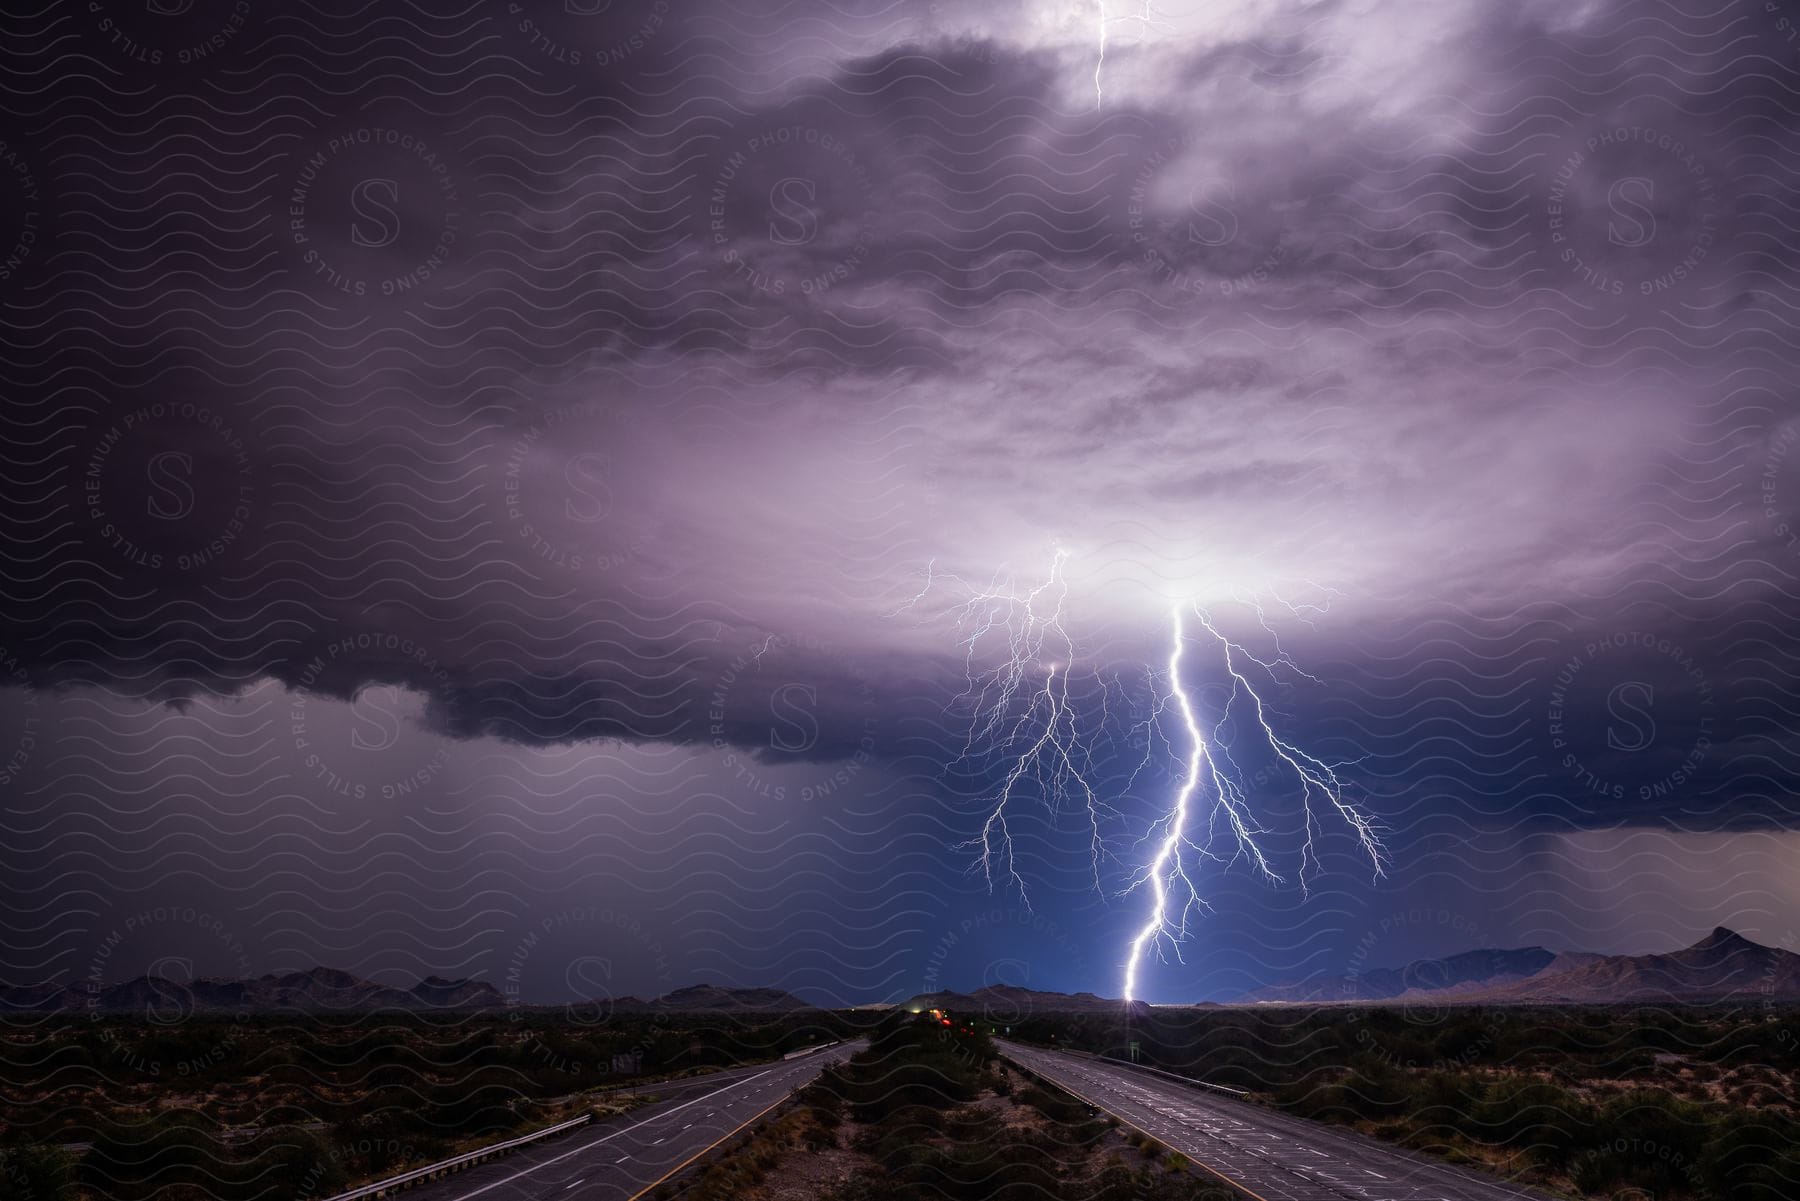 A lightning bolt emerges from a dark cloud in the background against the backdrop of a highway